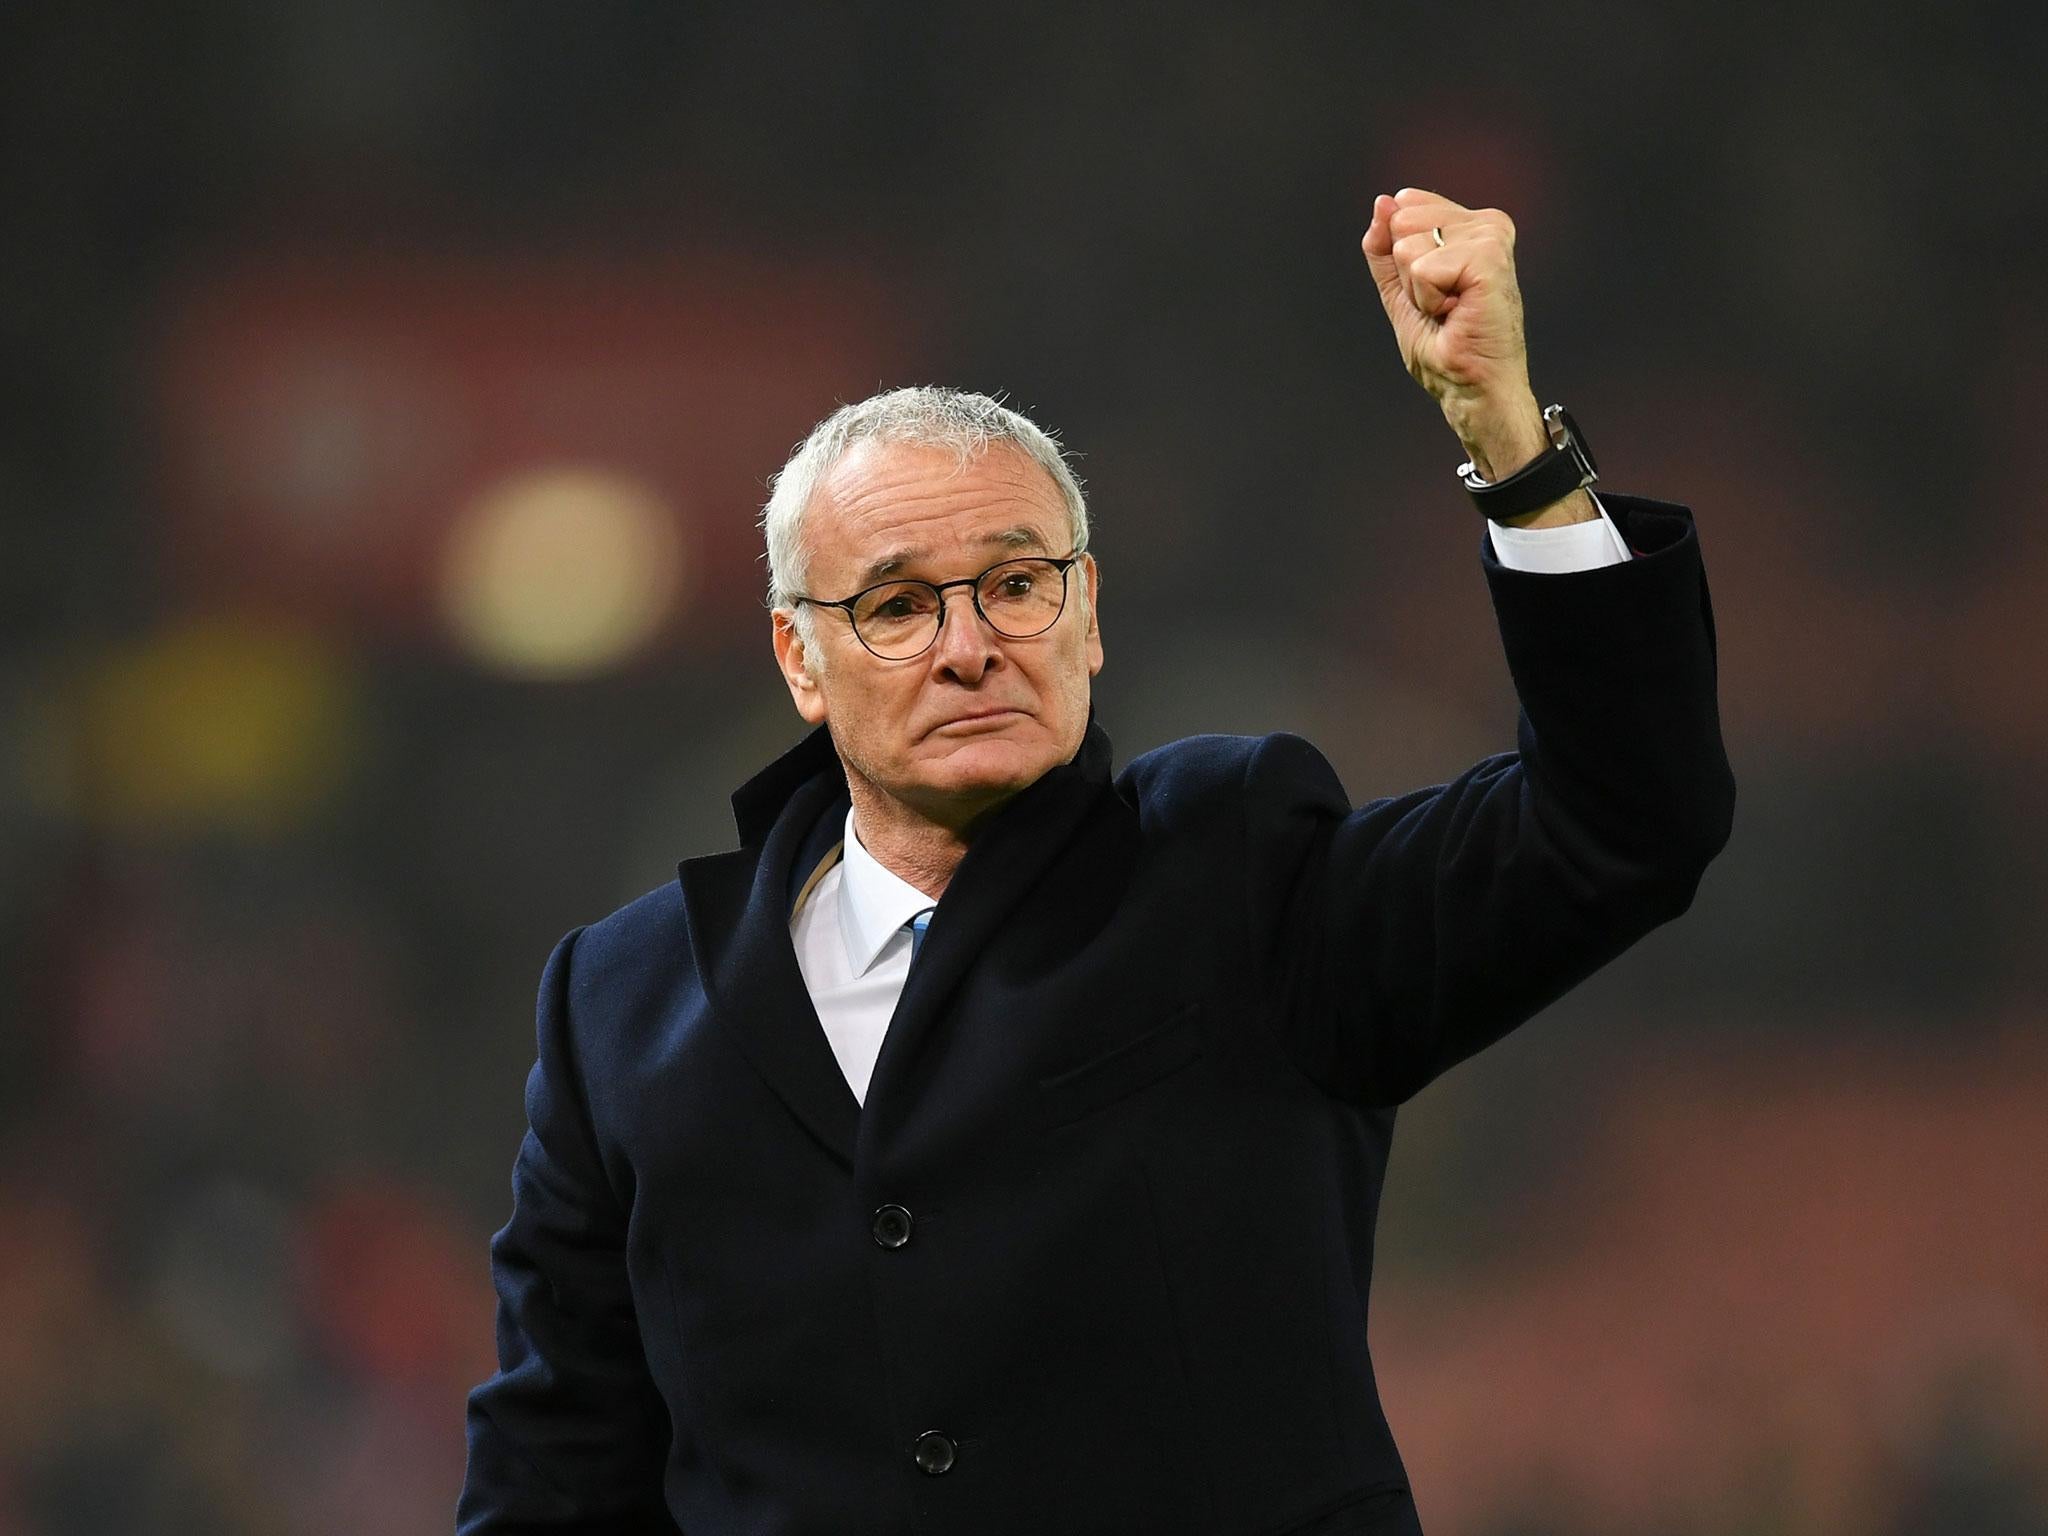 Ranieri's men came from a goal down to beat Everton 2-1 on Saturday